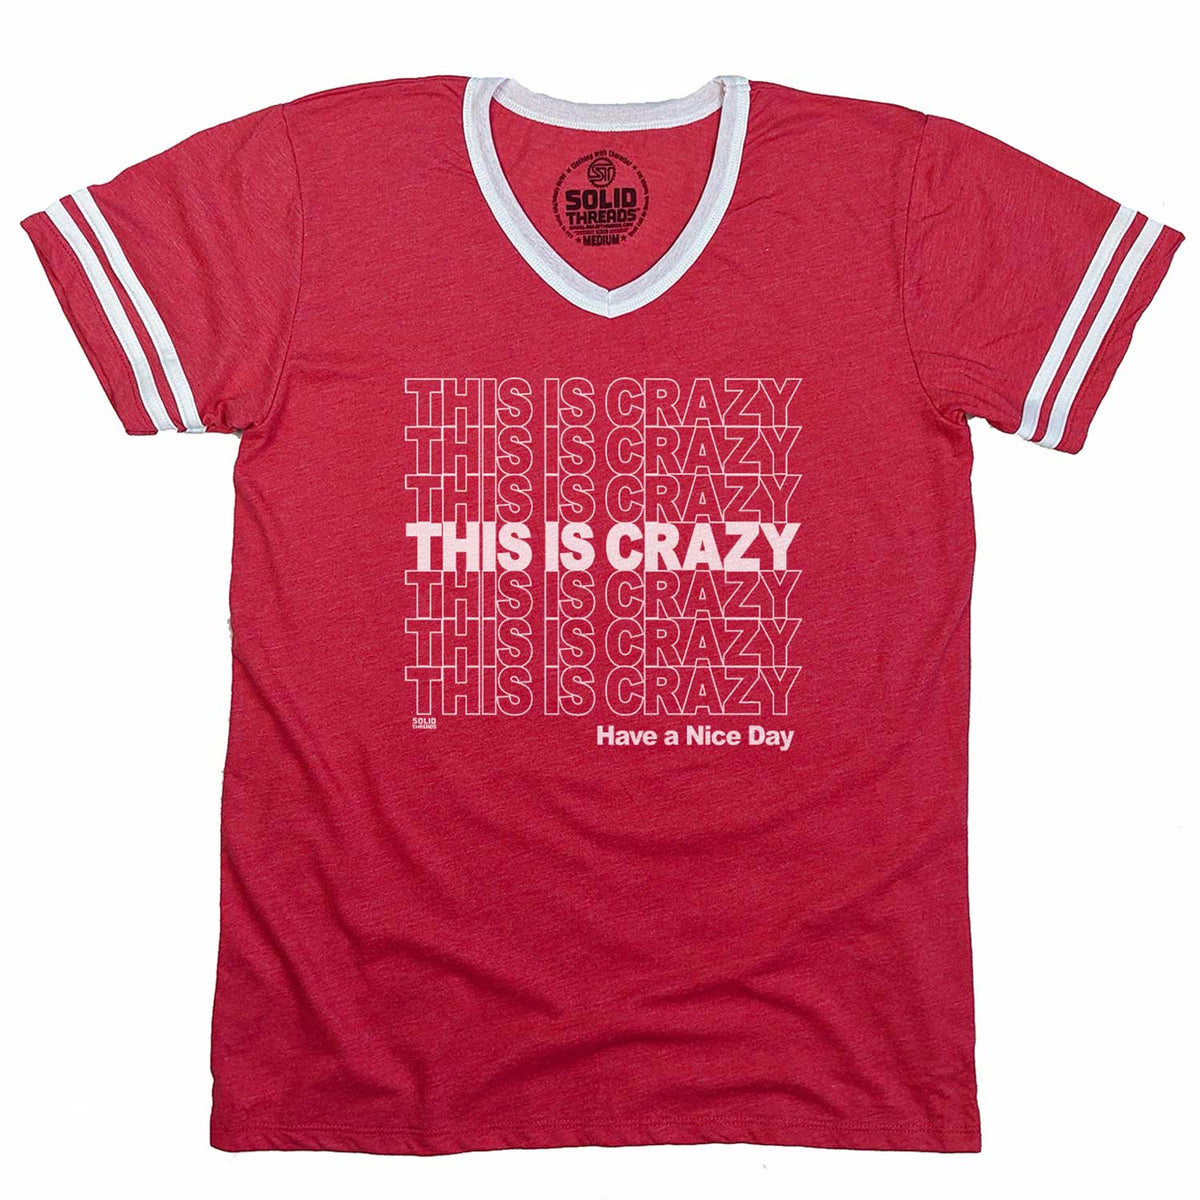 Men&#39;s This is Crazy Vintage Graphic V-Neck Tee | Funny National Lampoon&#39;s T-Shirt | Solid Threads